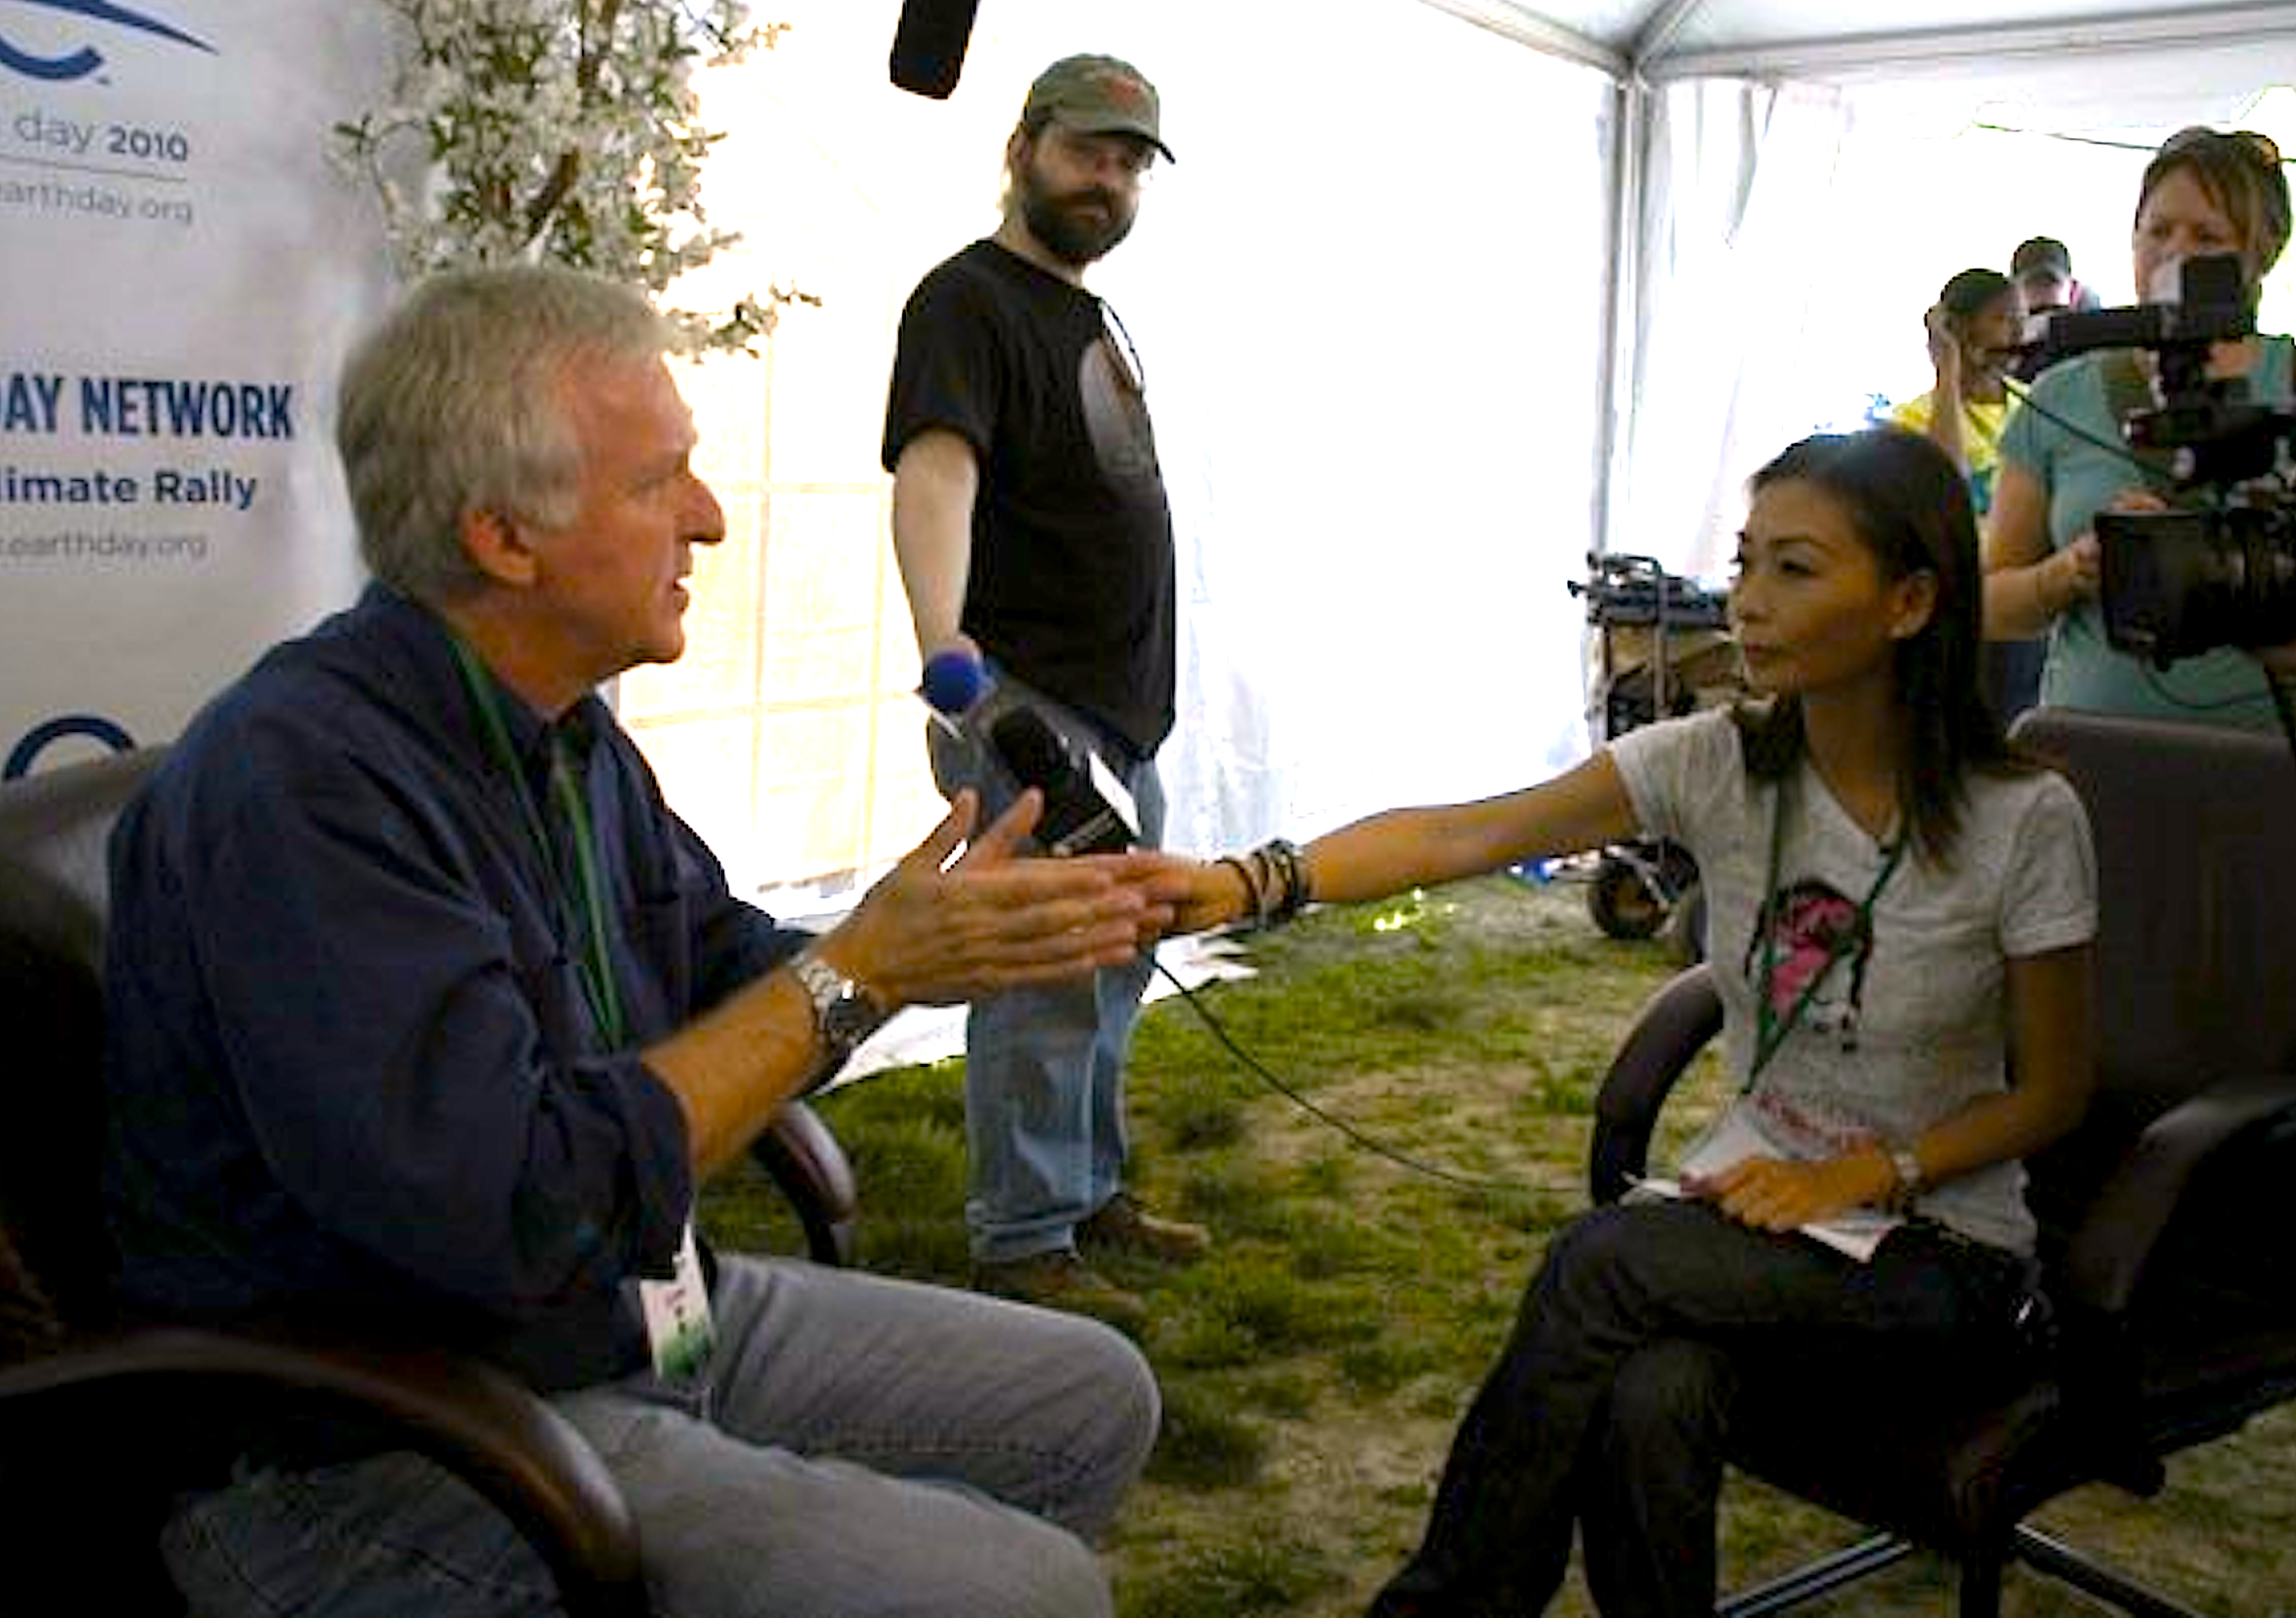 James Cameron exclusive interview at Earth Day 40th Anniversary